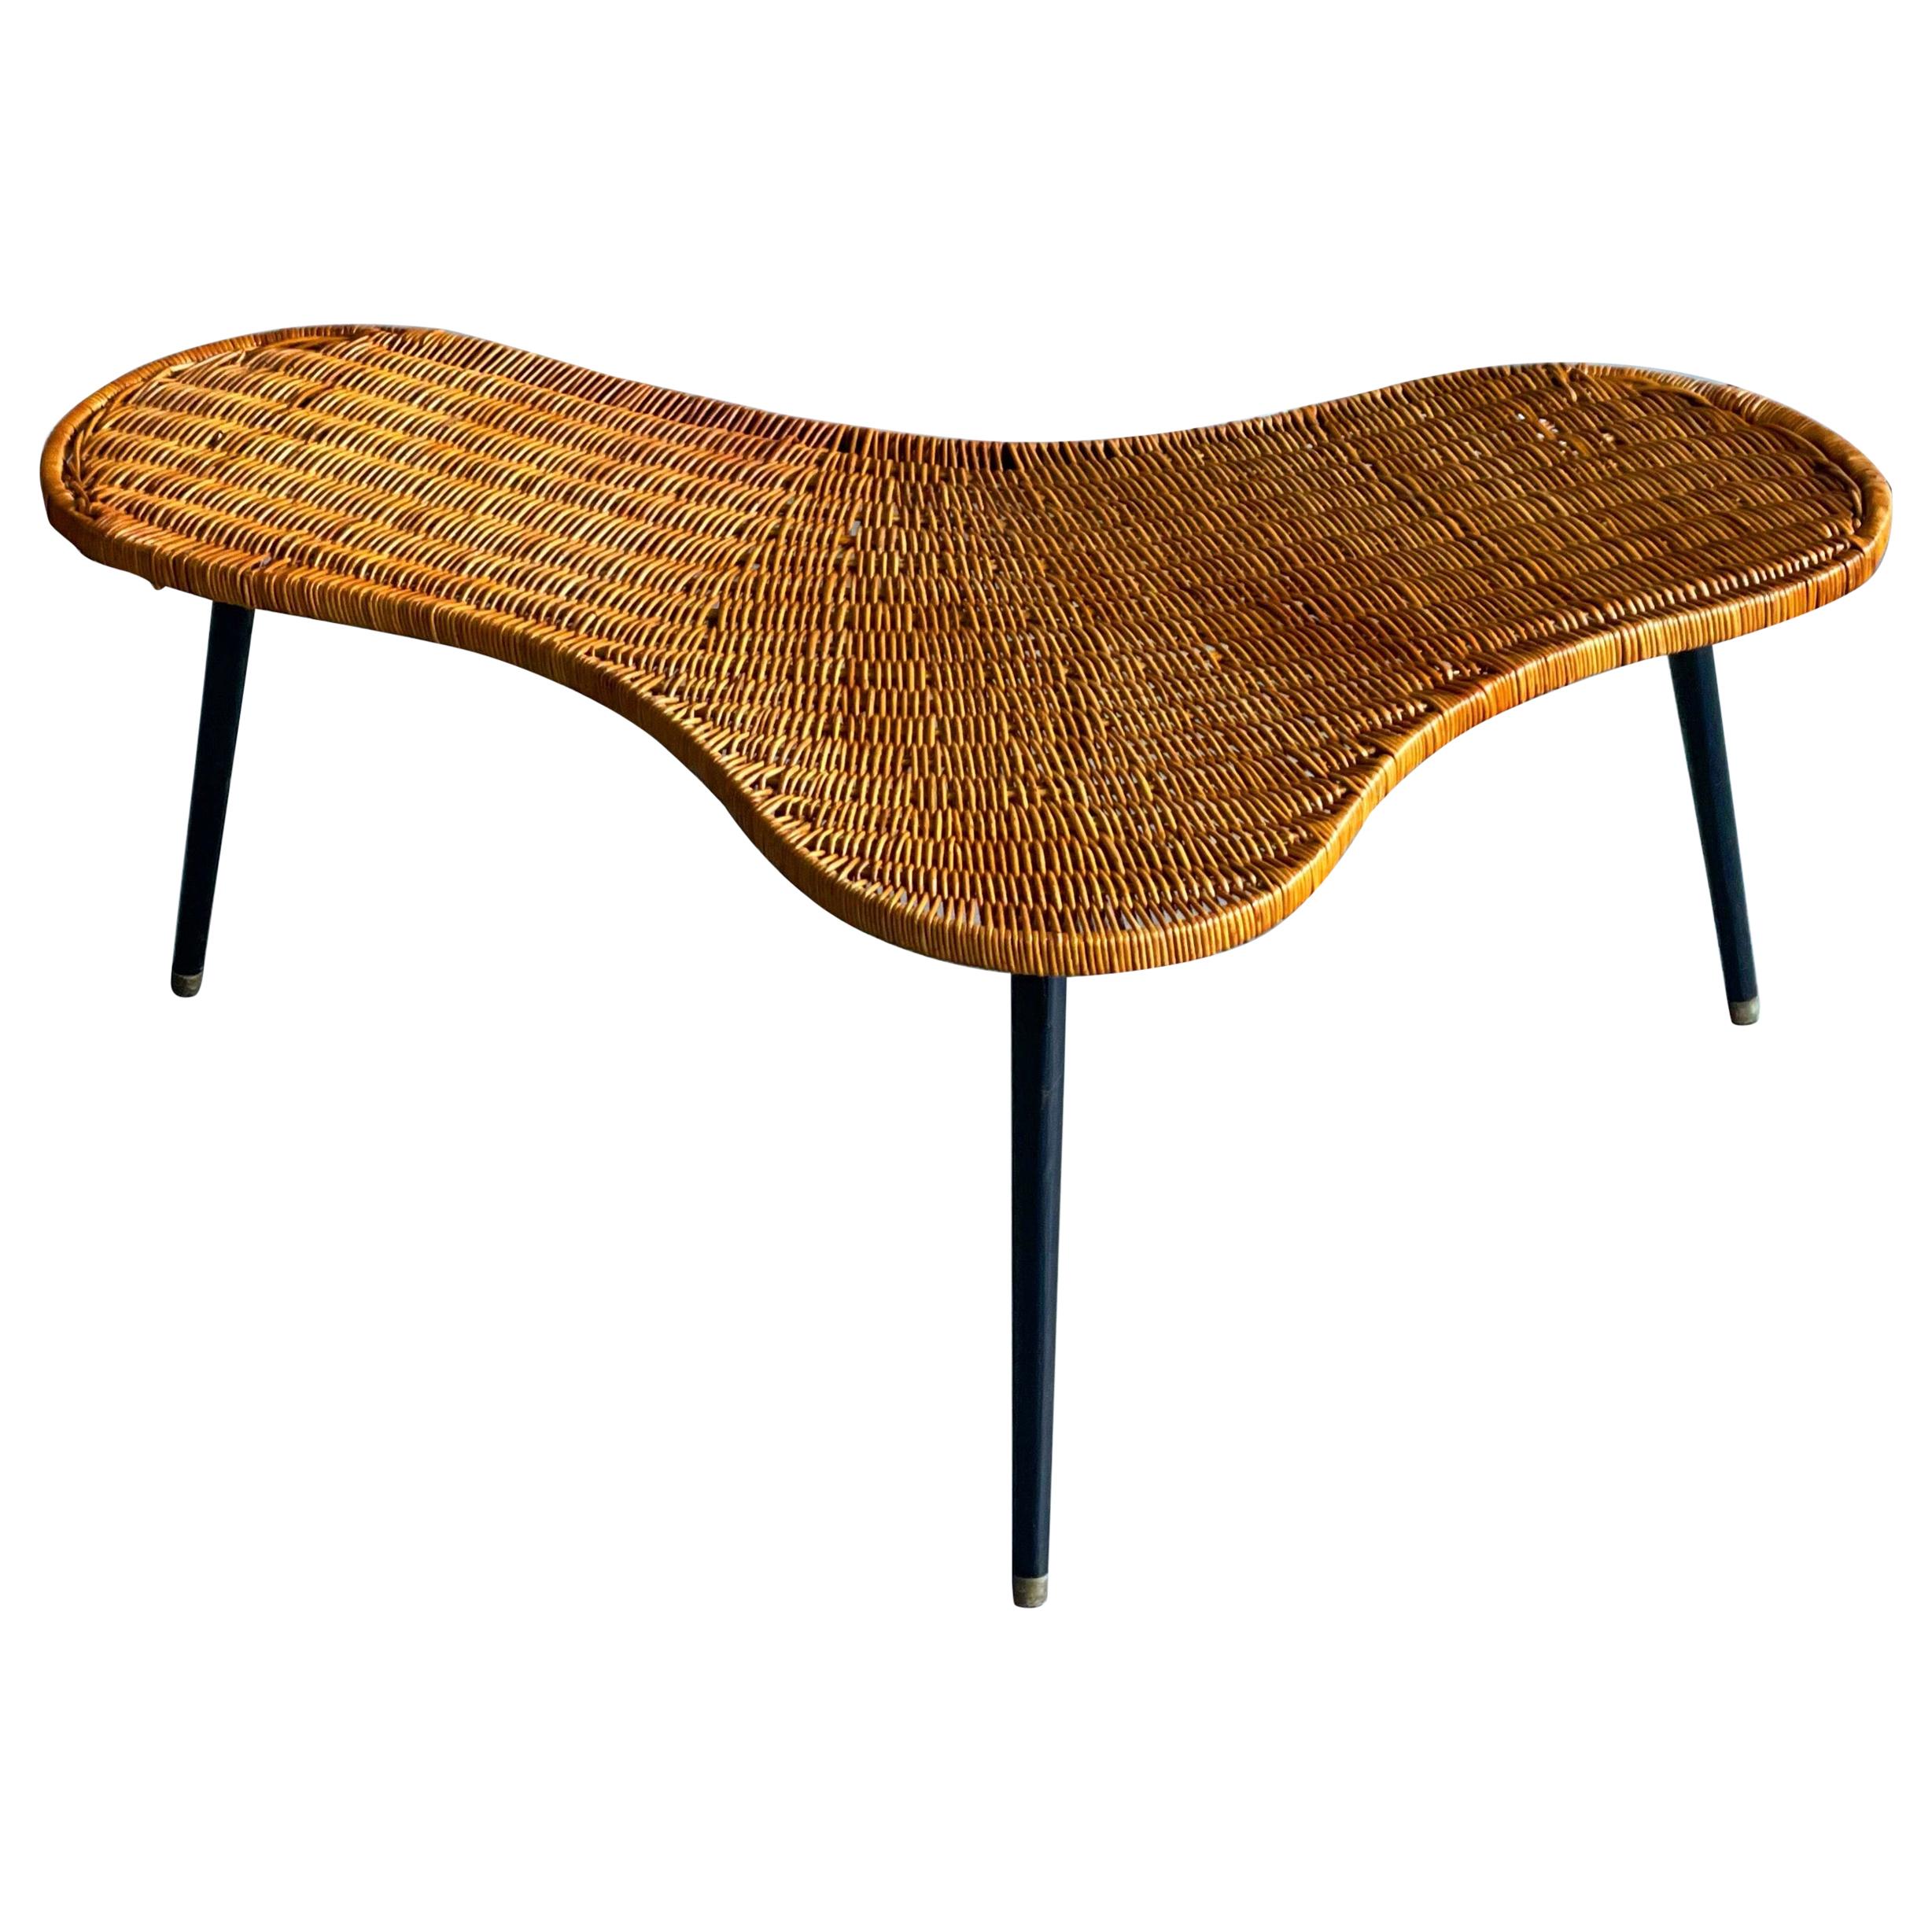 Midcentury Biomorphic Cocktail Table in Wicker and Iron, France, circa 1950's